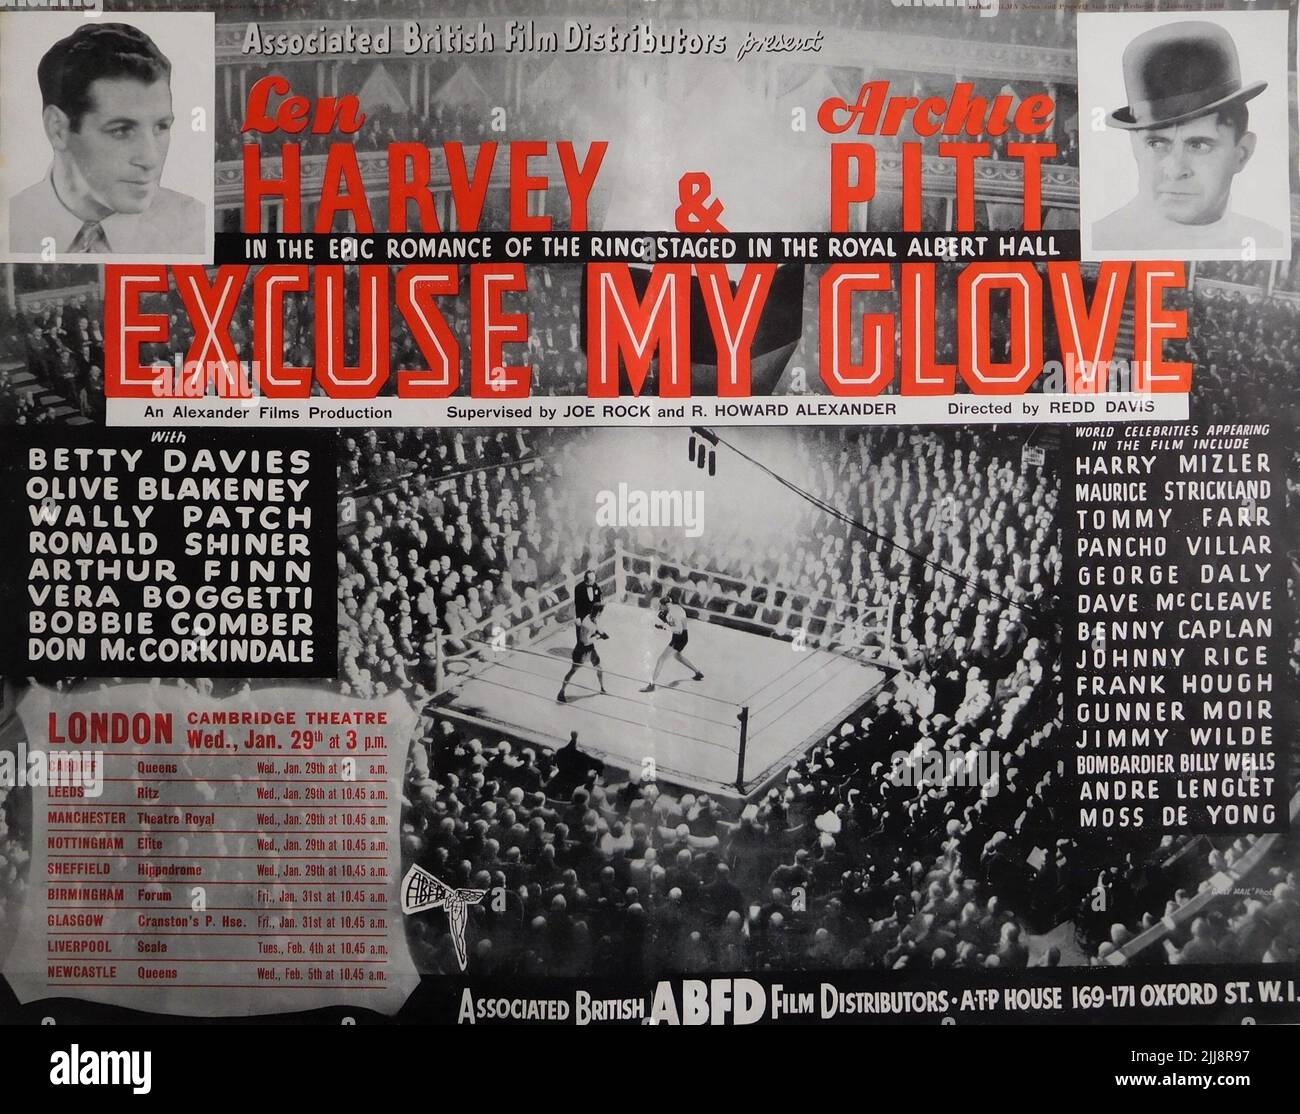 LEN HARVEY and ARCHIE PITT with appearances by TOMMY FARR JIMMY WILDE HARRY MIZLER Bombardier BILLY WELLS DAVE McCLEAVE PANCHO VILLAR and GUNNER MOIR in EXCUSE MY GLOVE 1936 director REDD DAVIS story R. Howard Alexander film editor Sidney Cole  Alexander Films / Associated British Film Distributors (A.B.F.D.) Stock Photo